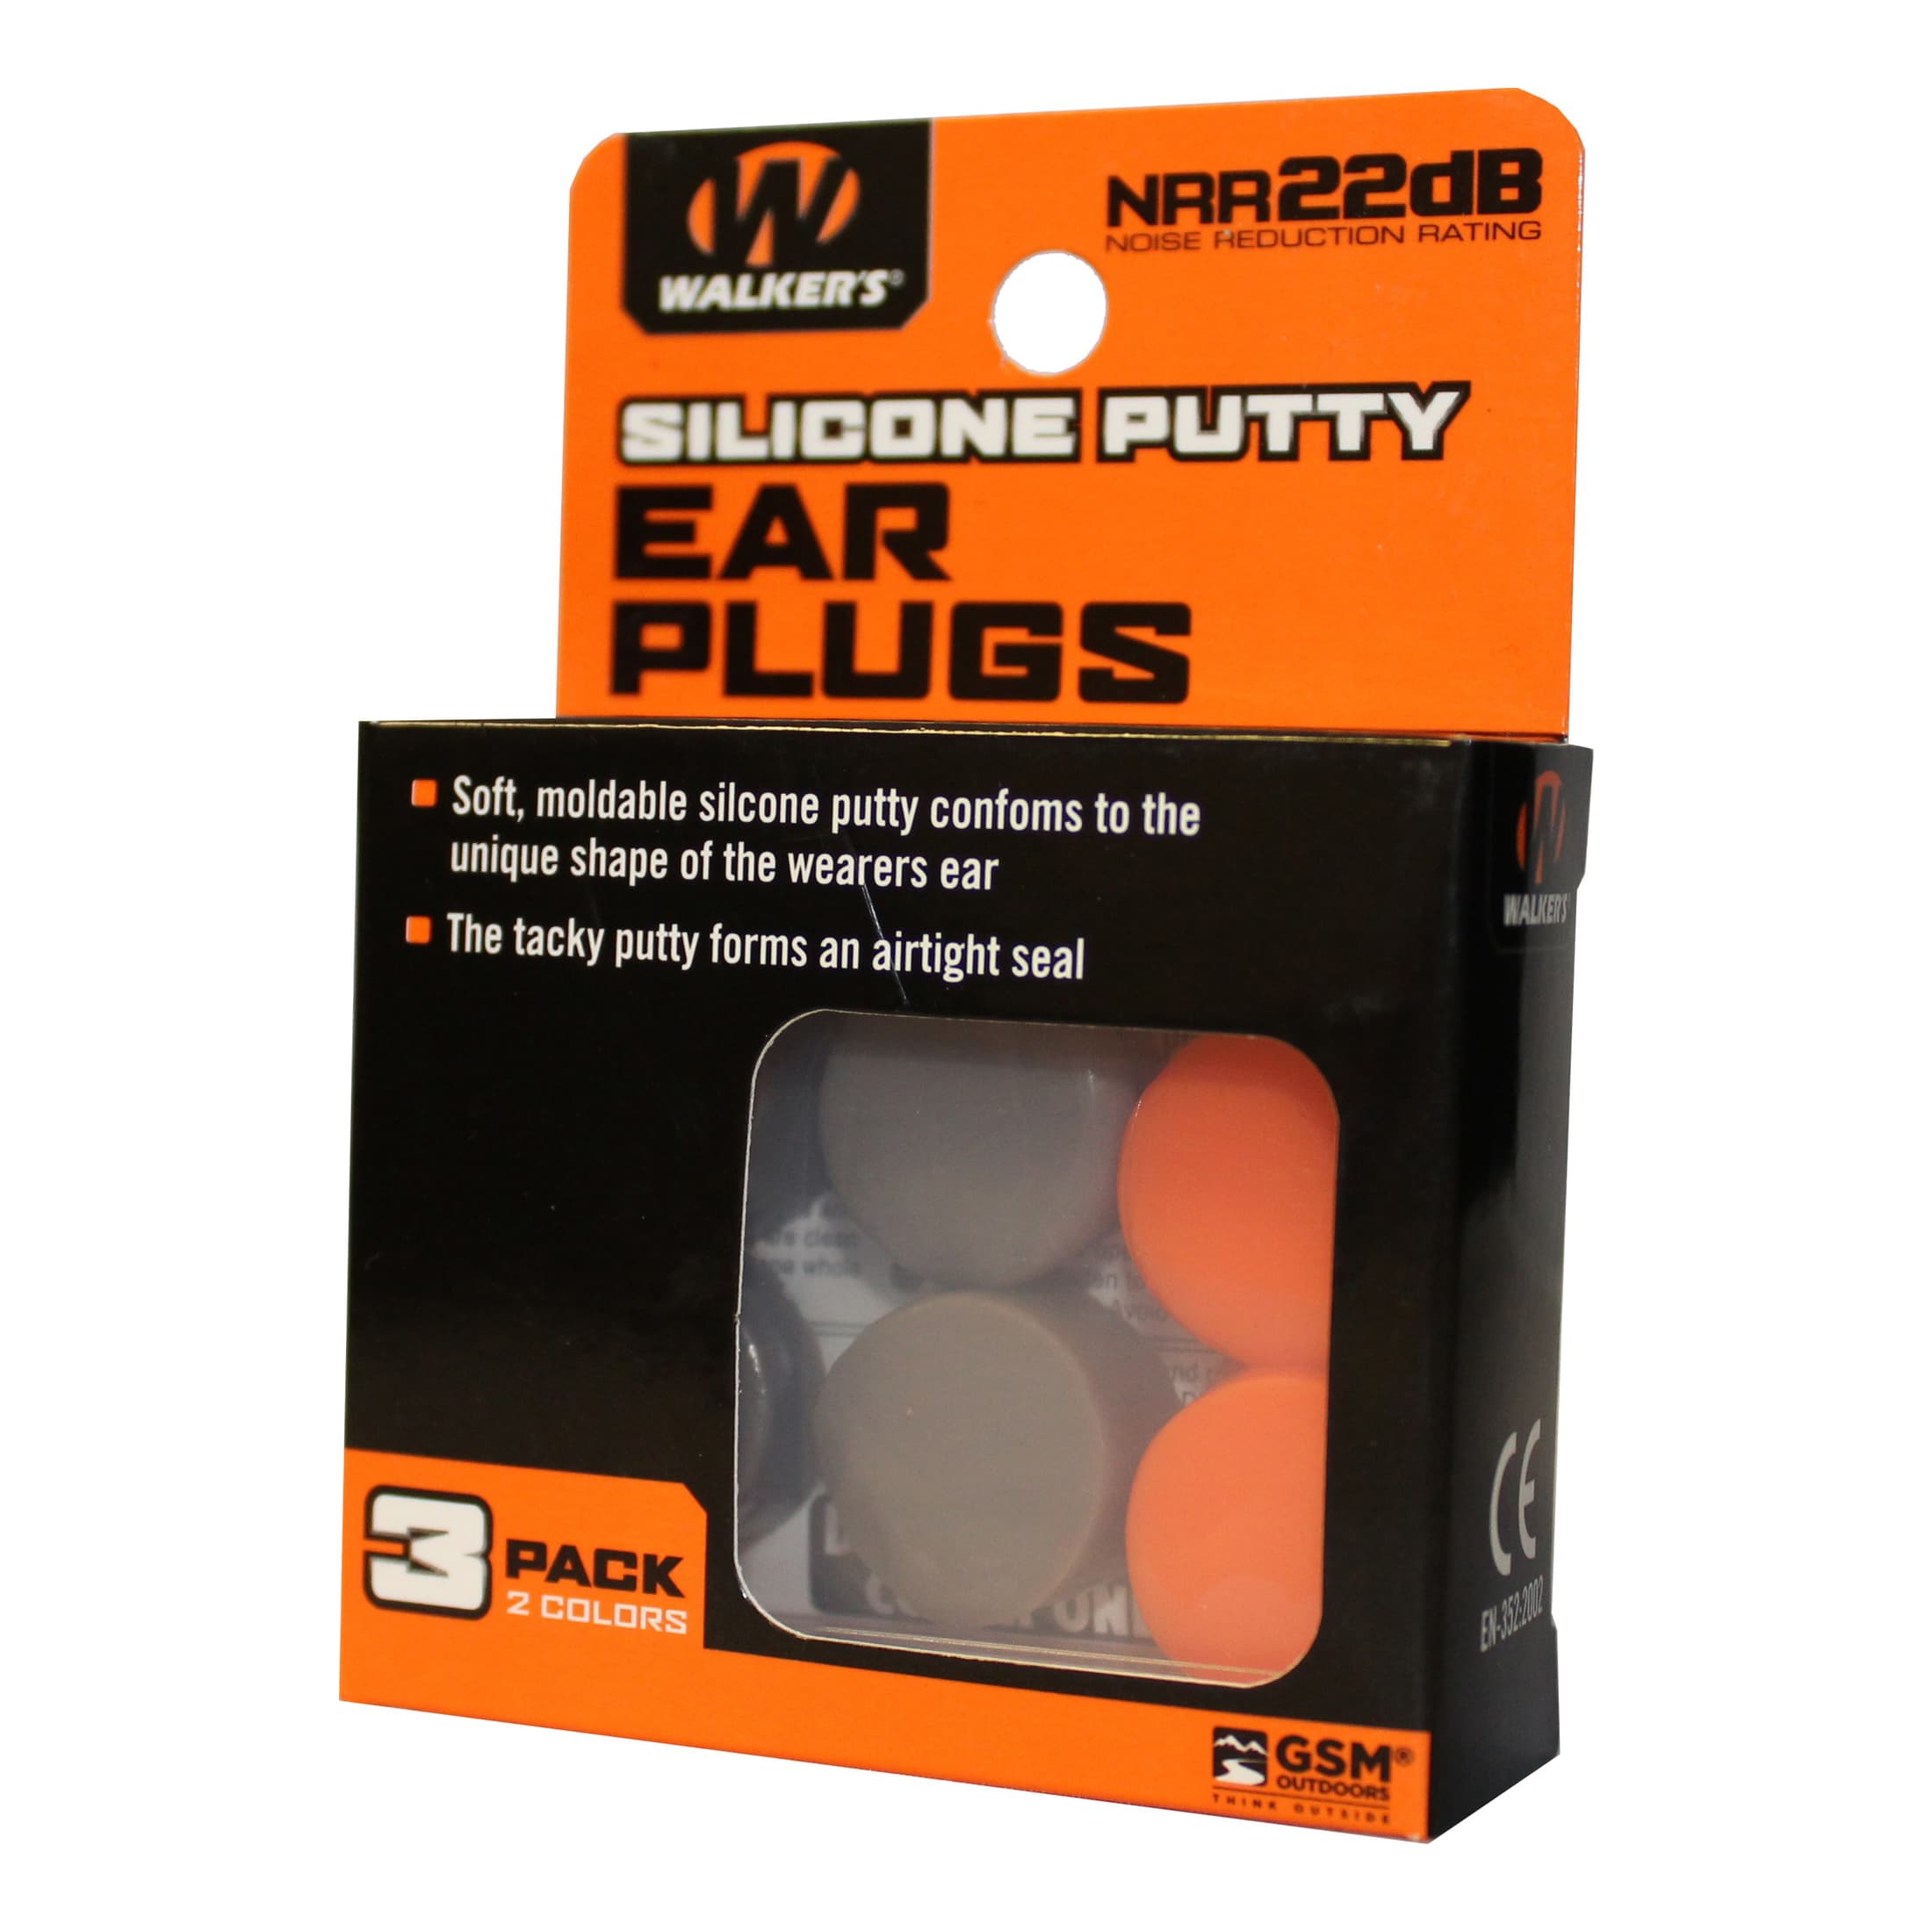 Walker's® Silicone Putty Ear Plugs